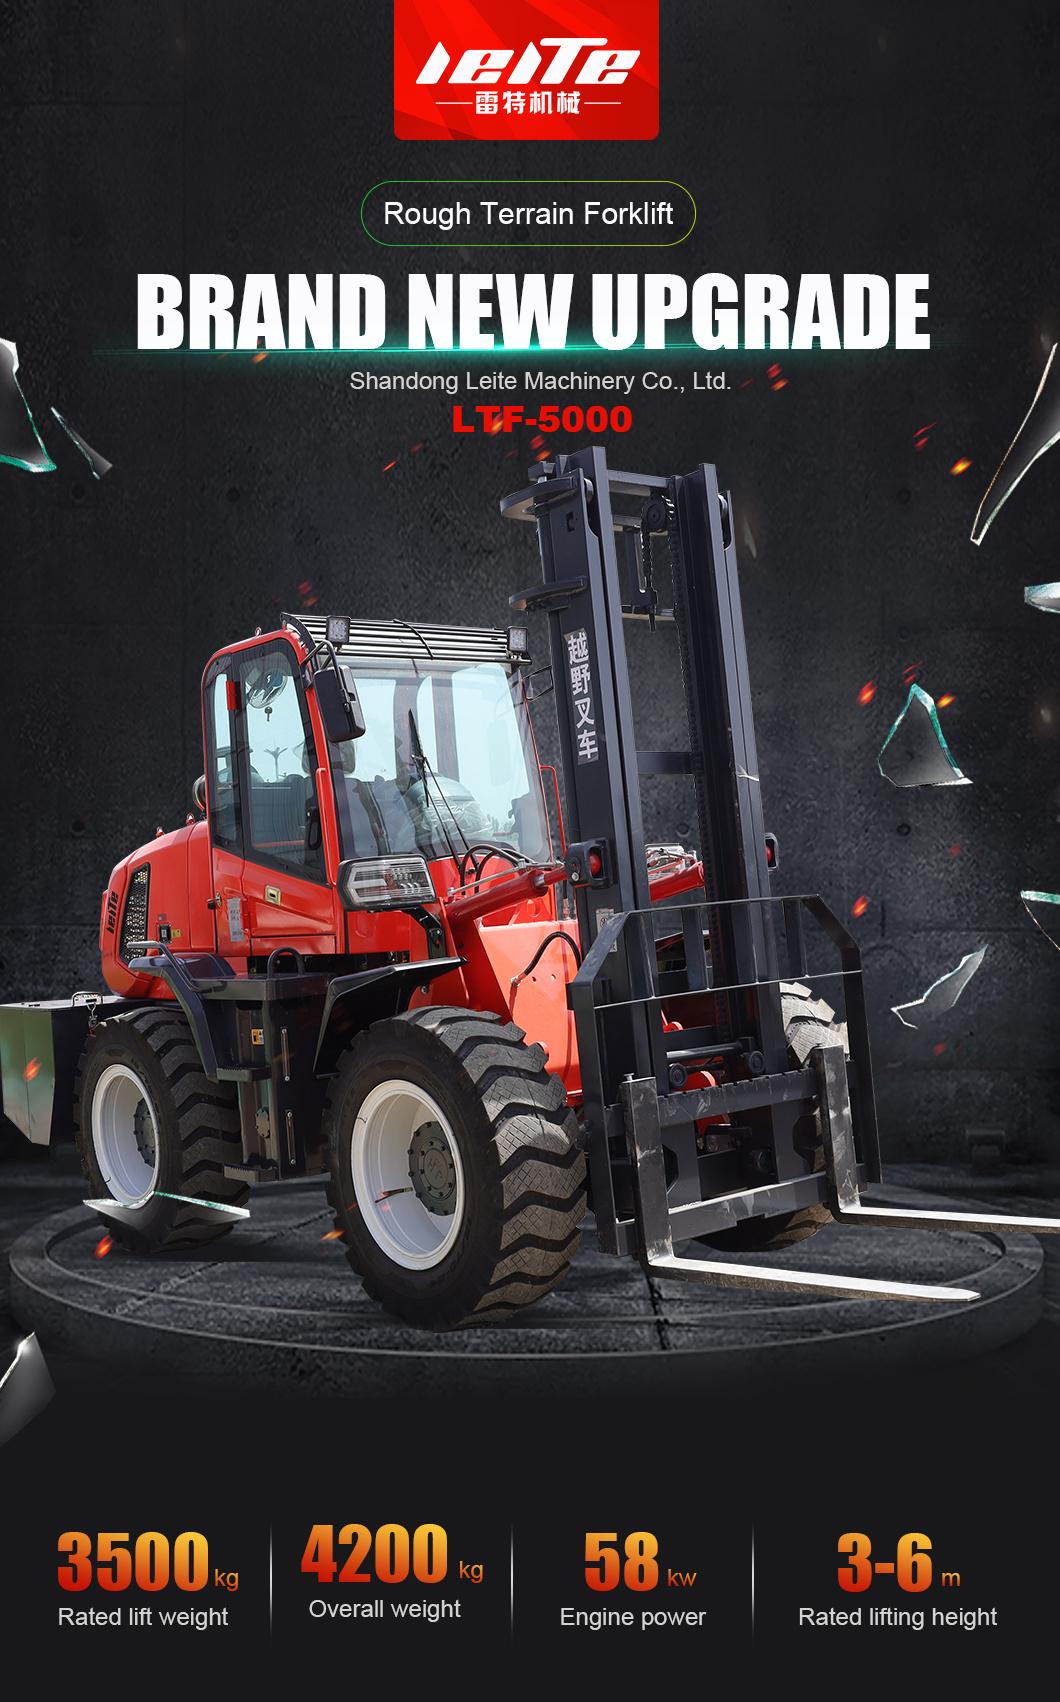 Four-Wheel Drive Cross-Country Mounted Forklift All Terrain Made in China